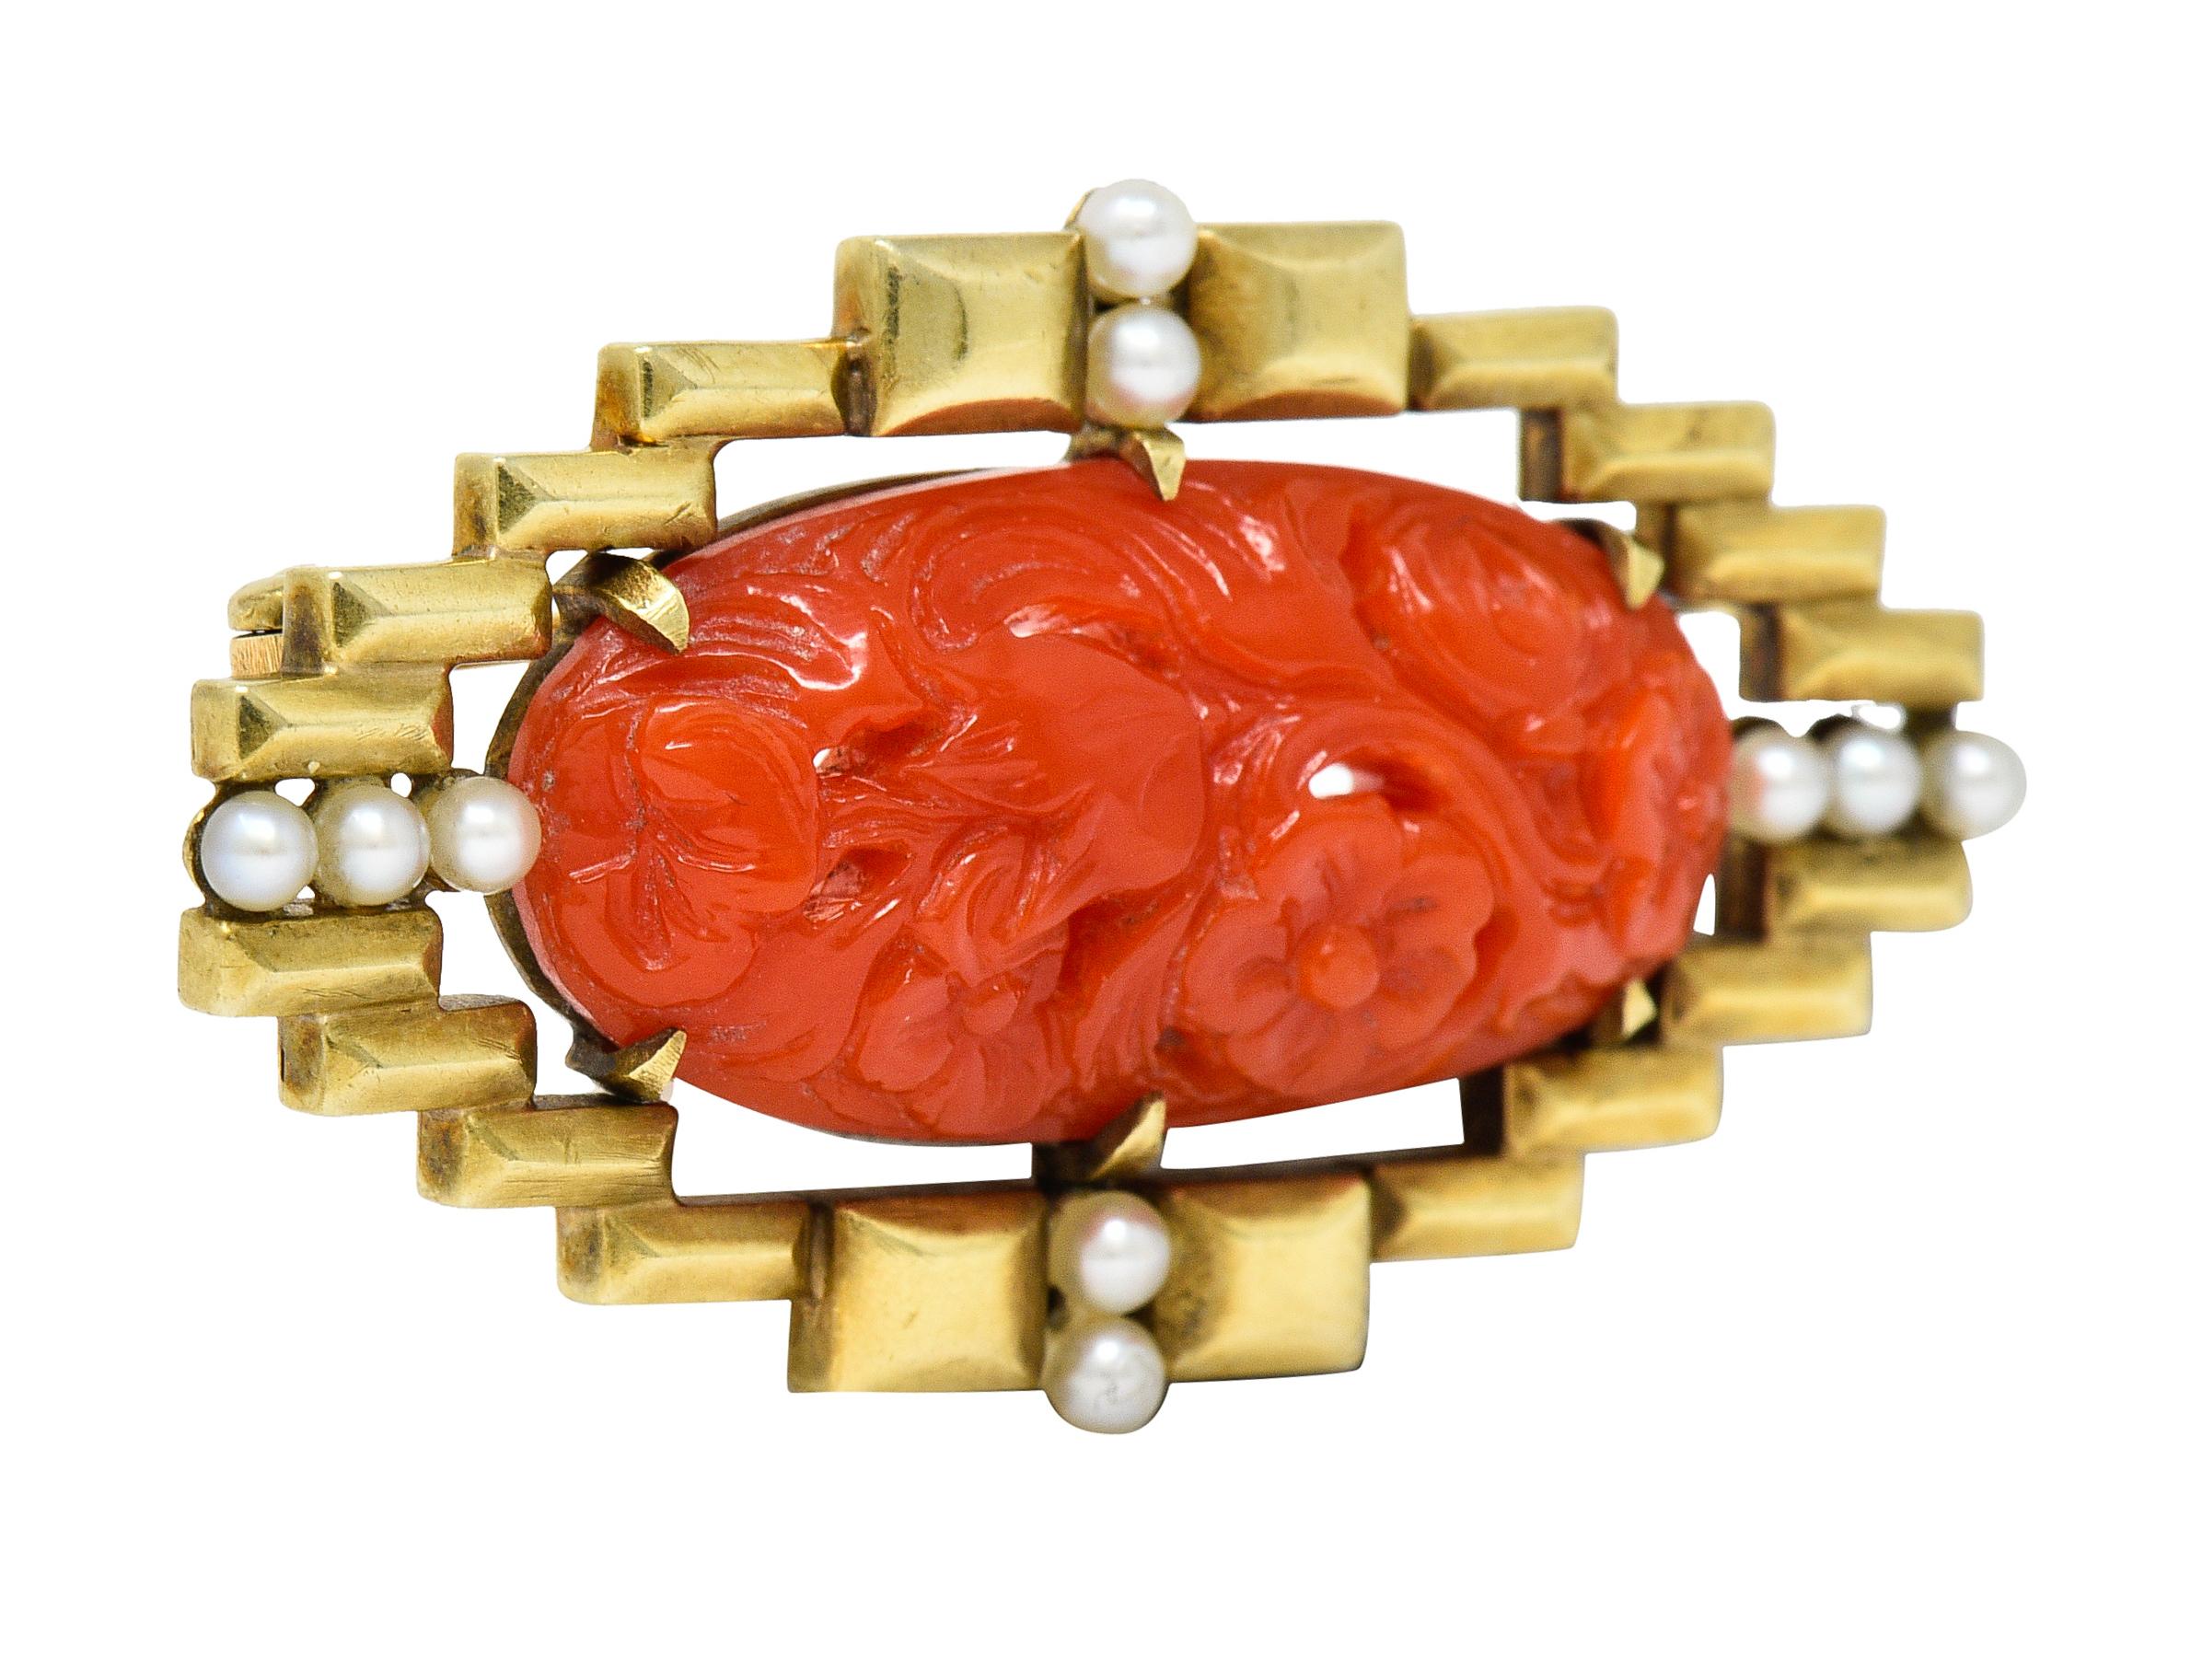 Centering an oval cabochon of coral, deeply carved to depict scrolling florals

Opaque with uniform orangey-red color and measures approximately 27.0 x 12.5 mm

Claw set with a geometric surround accented by 2.5 mm round pearls

Well-matched with